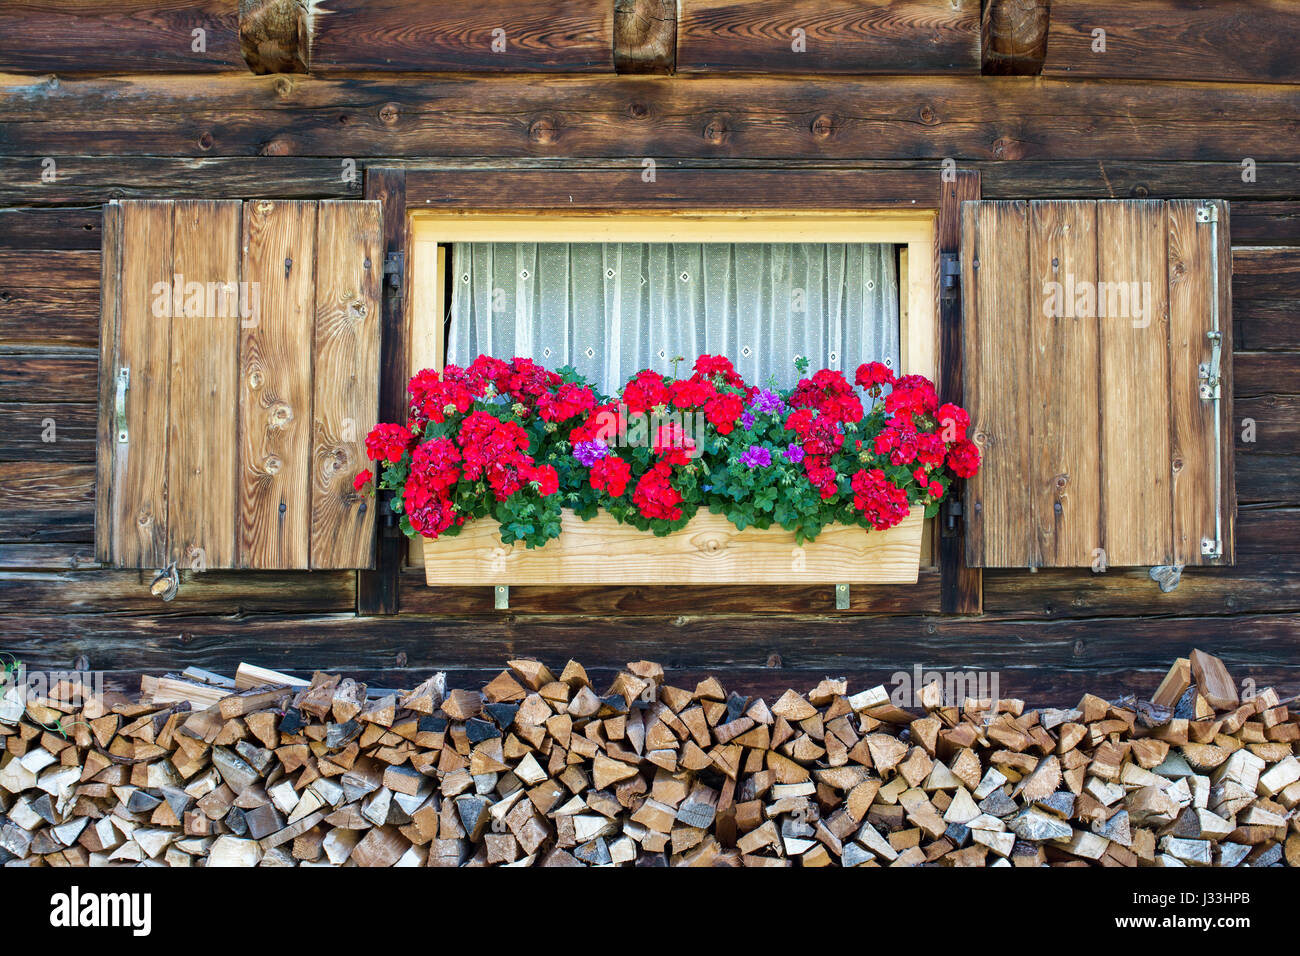 Geraniums in front of window of mountain hut, laminated wood, Engalm, Vomp, Tyrol, Austria Stock Photo